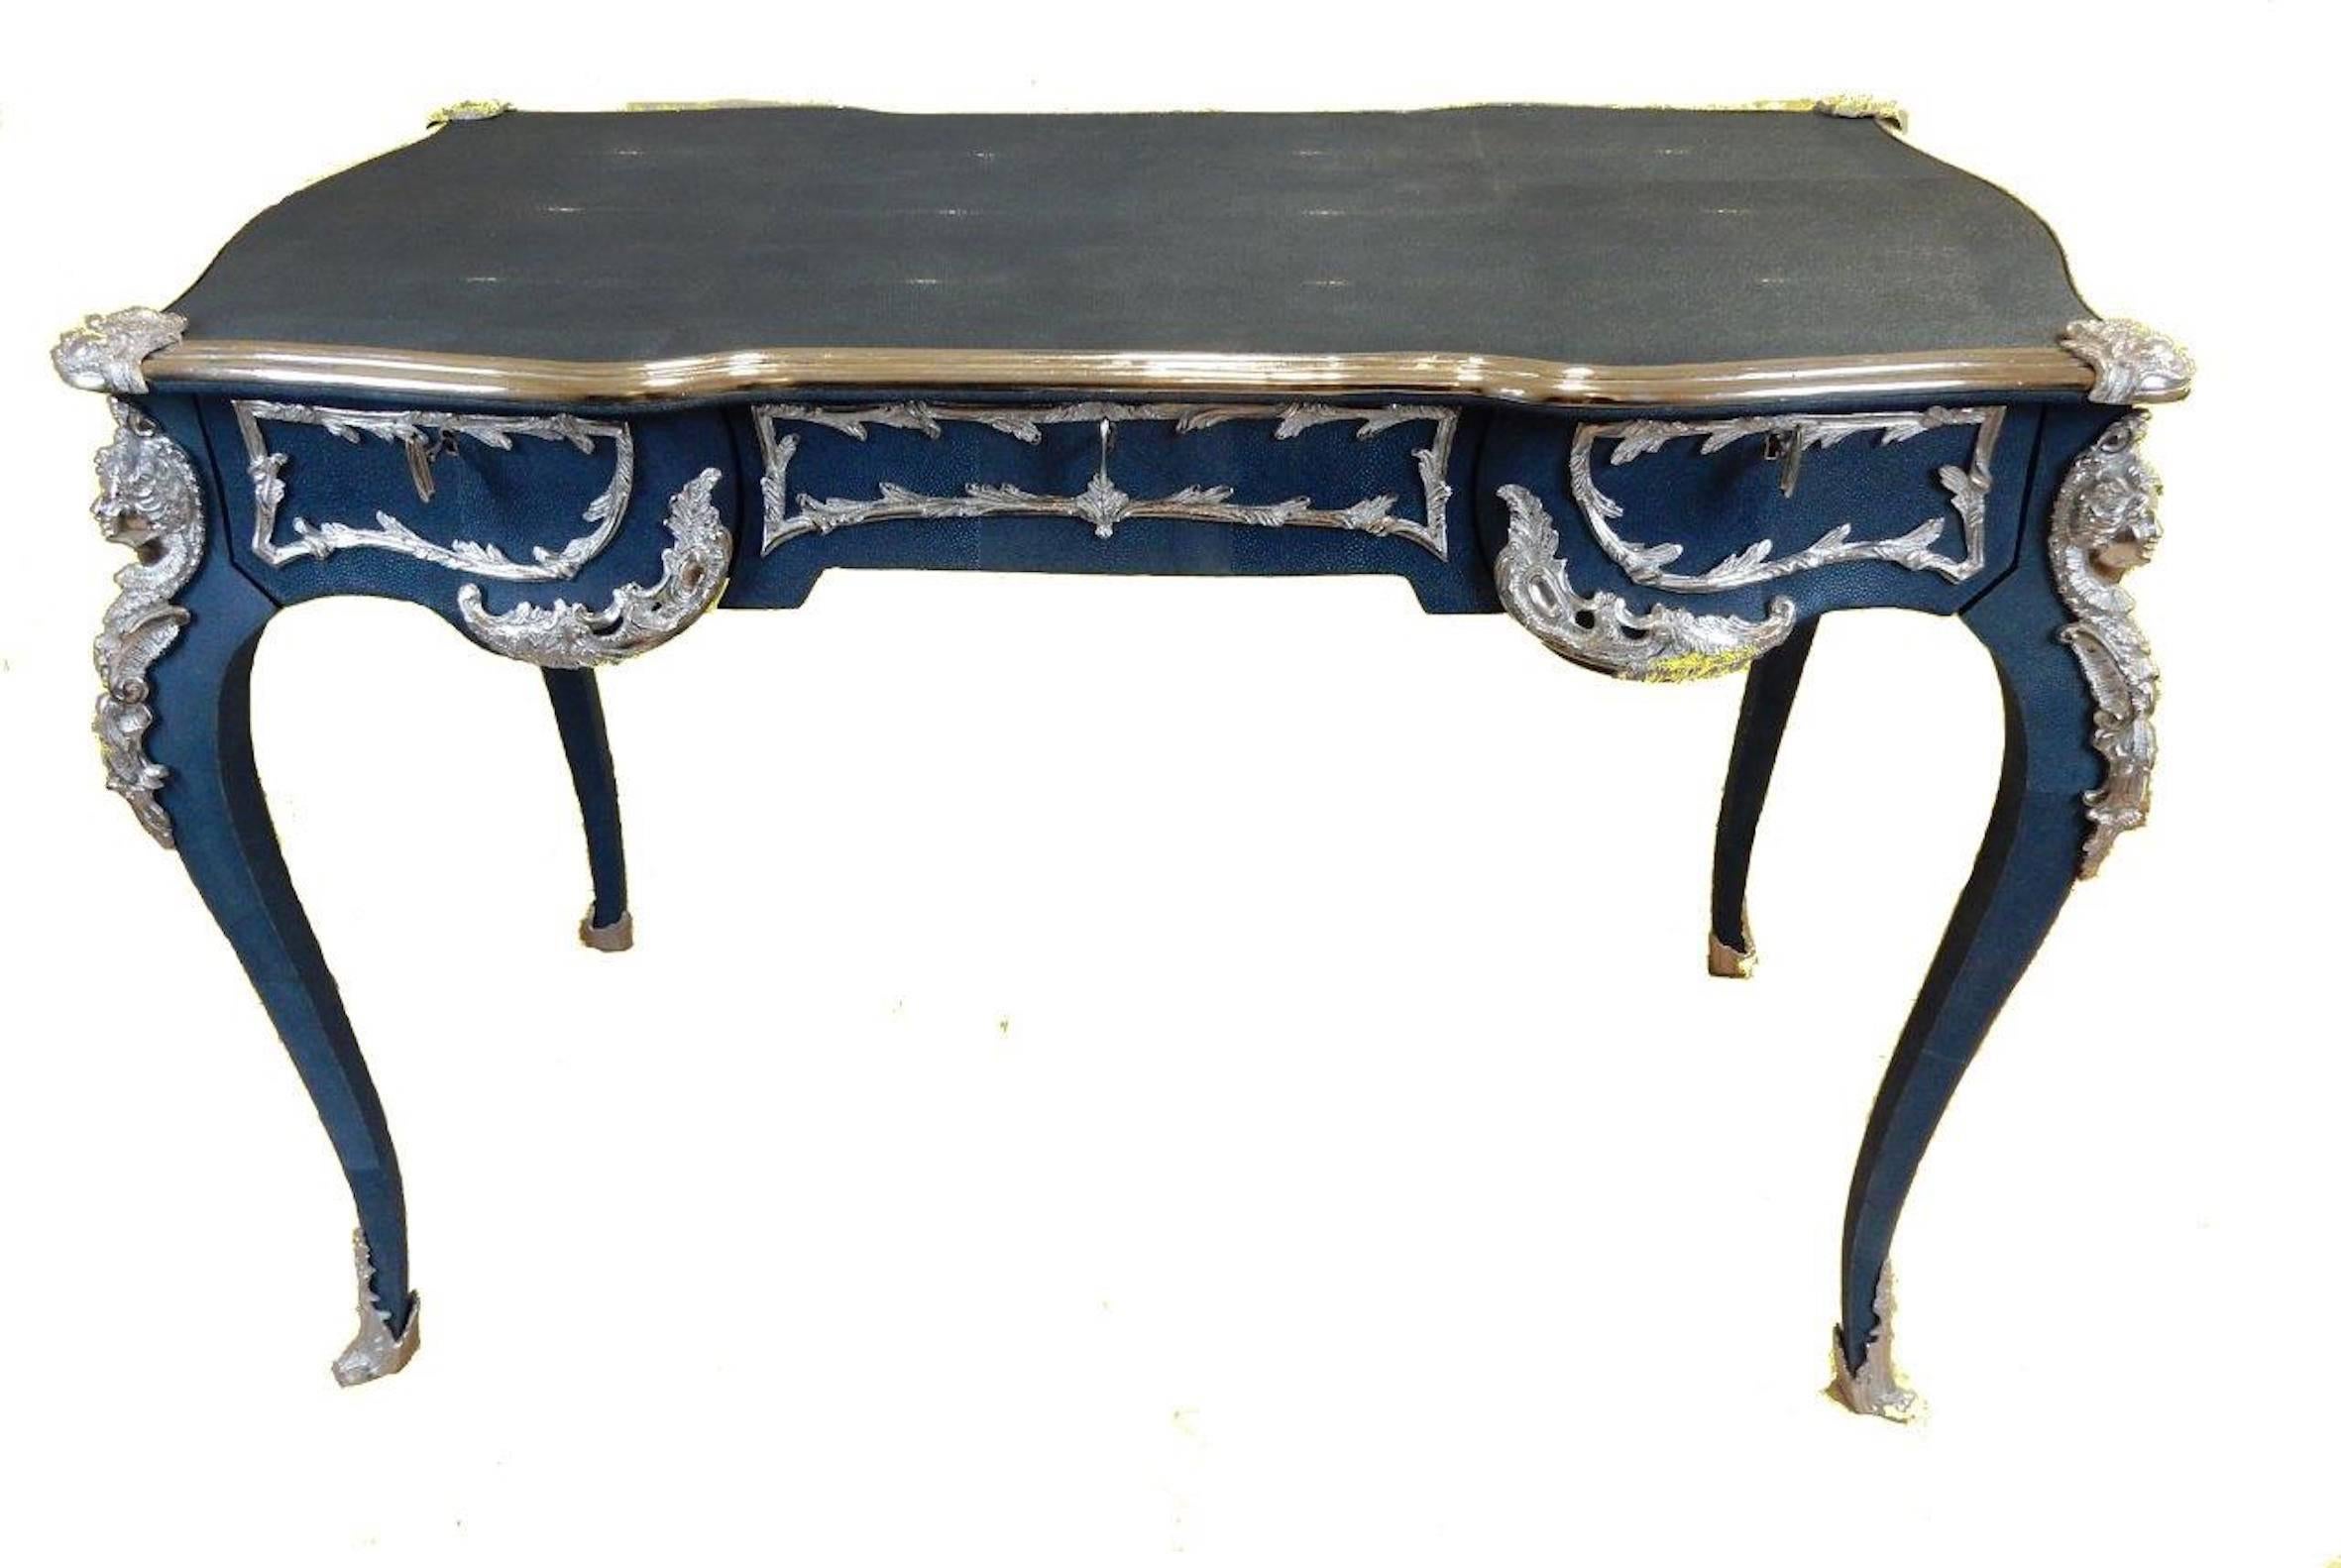 A Shagreen and Nickel plated Bureau Plat

A Louis XV-style blue stained shagreen (stingray skin) and nickel plated Bureau Plat, serpentine shaped rectangular top above three frieze drawers and false drawers on the other side, on cabriole legs